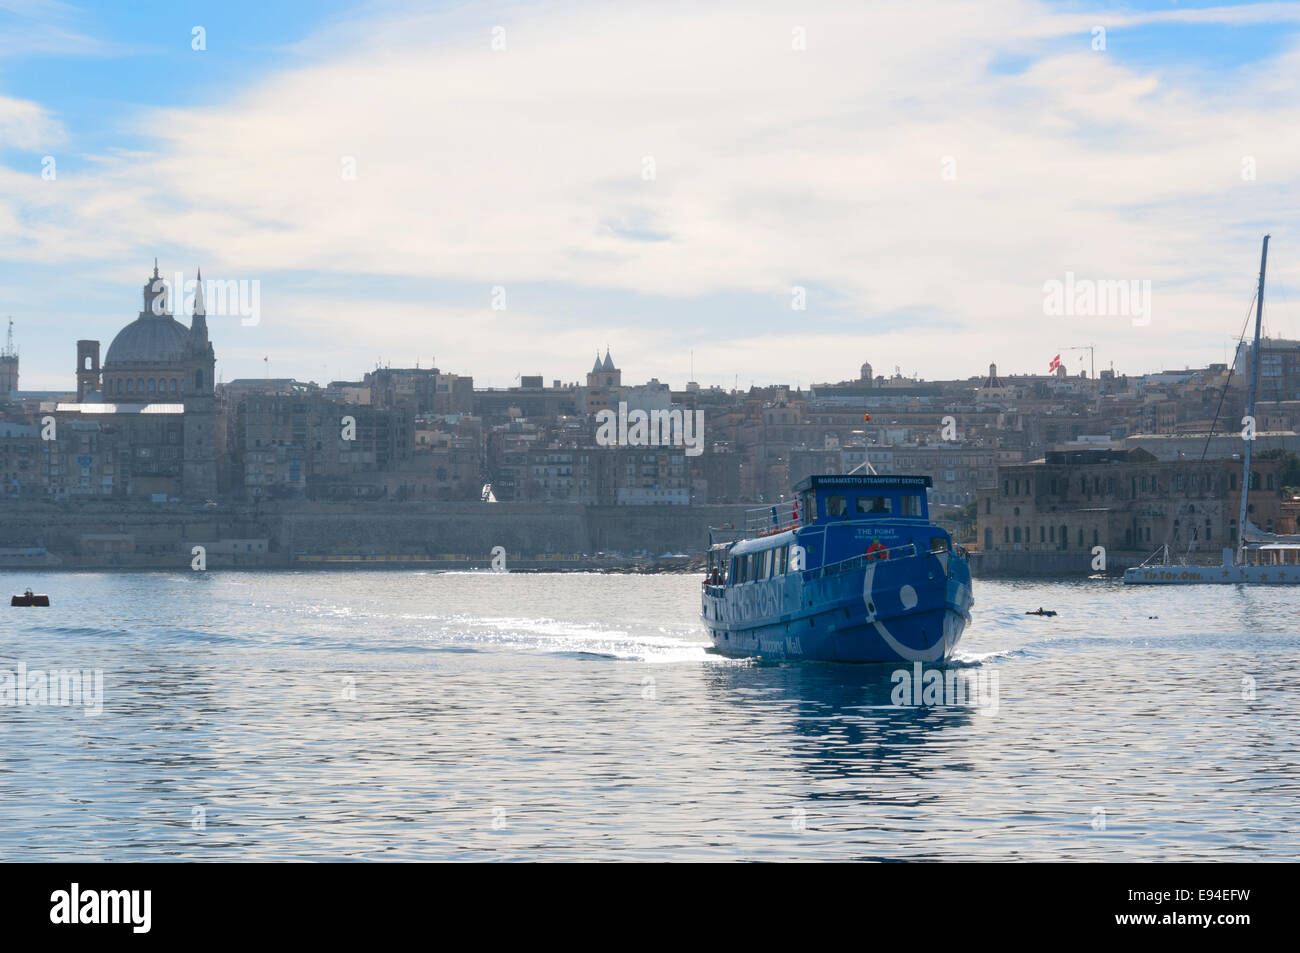 The Valletta to Sliema ferry with Valletta, the capital of Malta and the European Capital of Culture for 2018 in the background Stock Photo